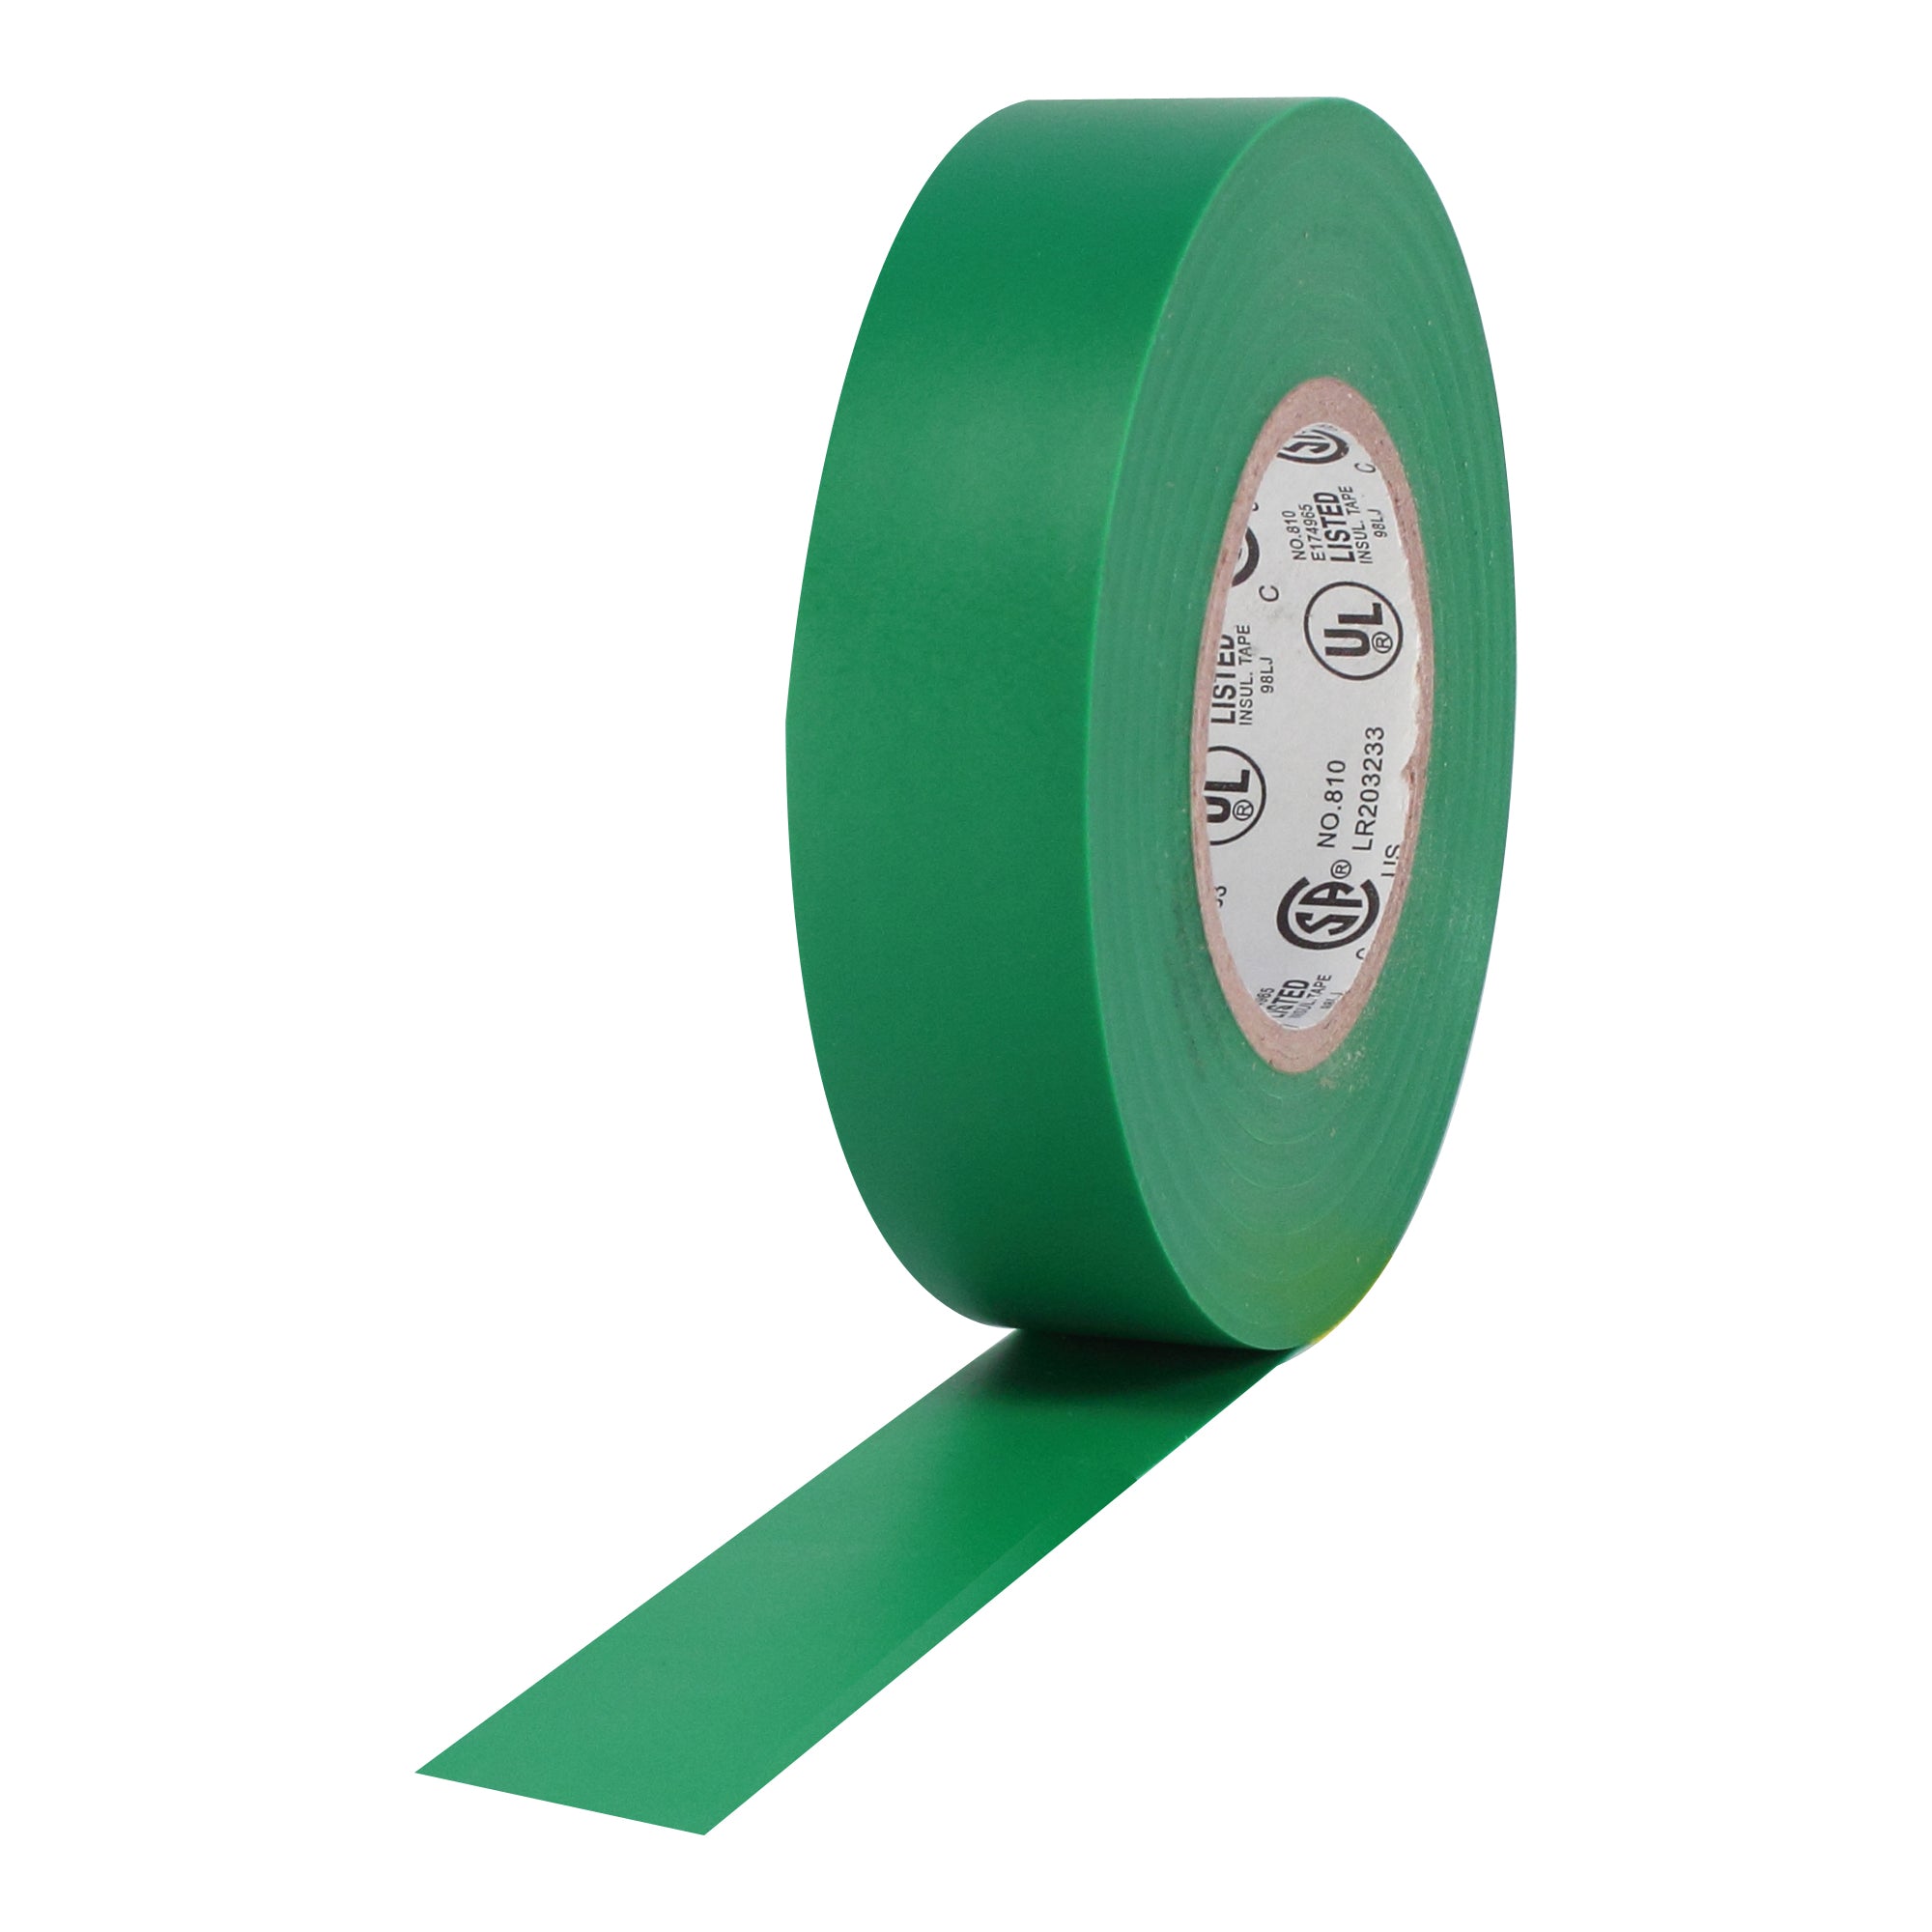 Pro Tapes Pro Plus Electrical Tape - 3/4" x 60', Green